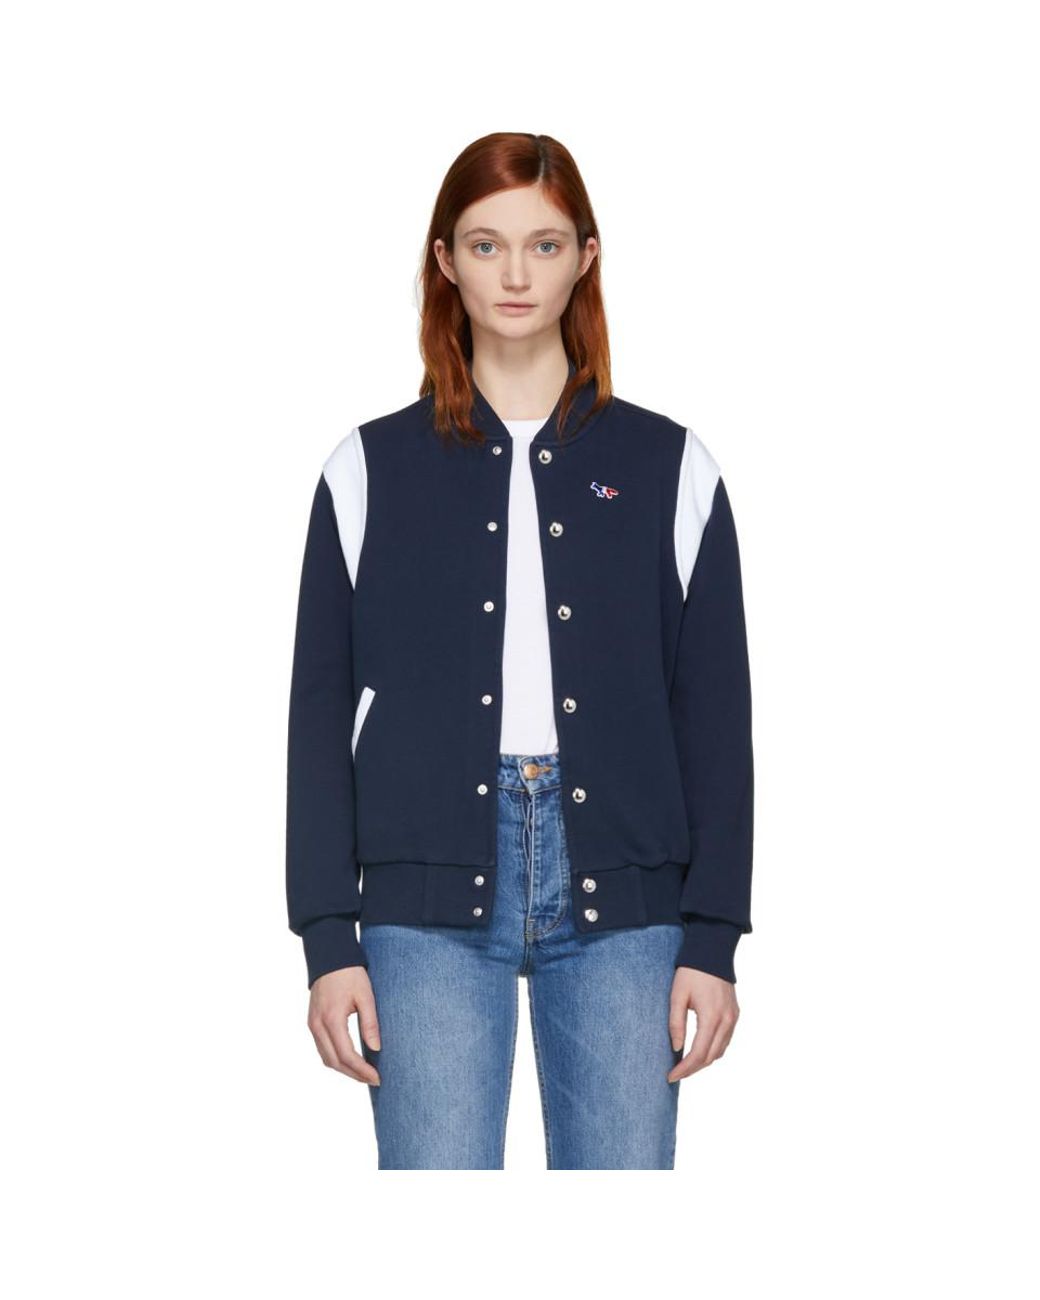 Maison Kitsuné Navy And White Teddy Tricolor Fox Bomber Jacket in